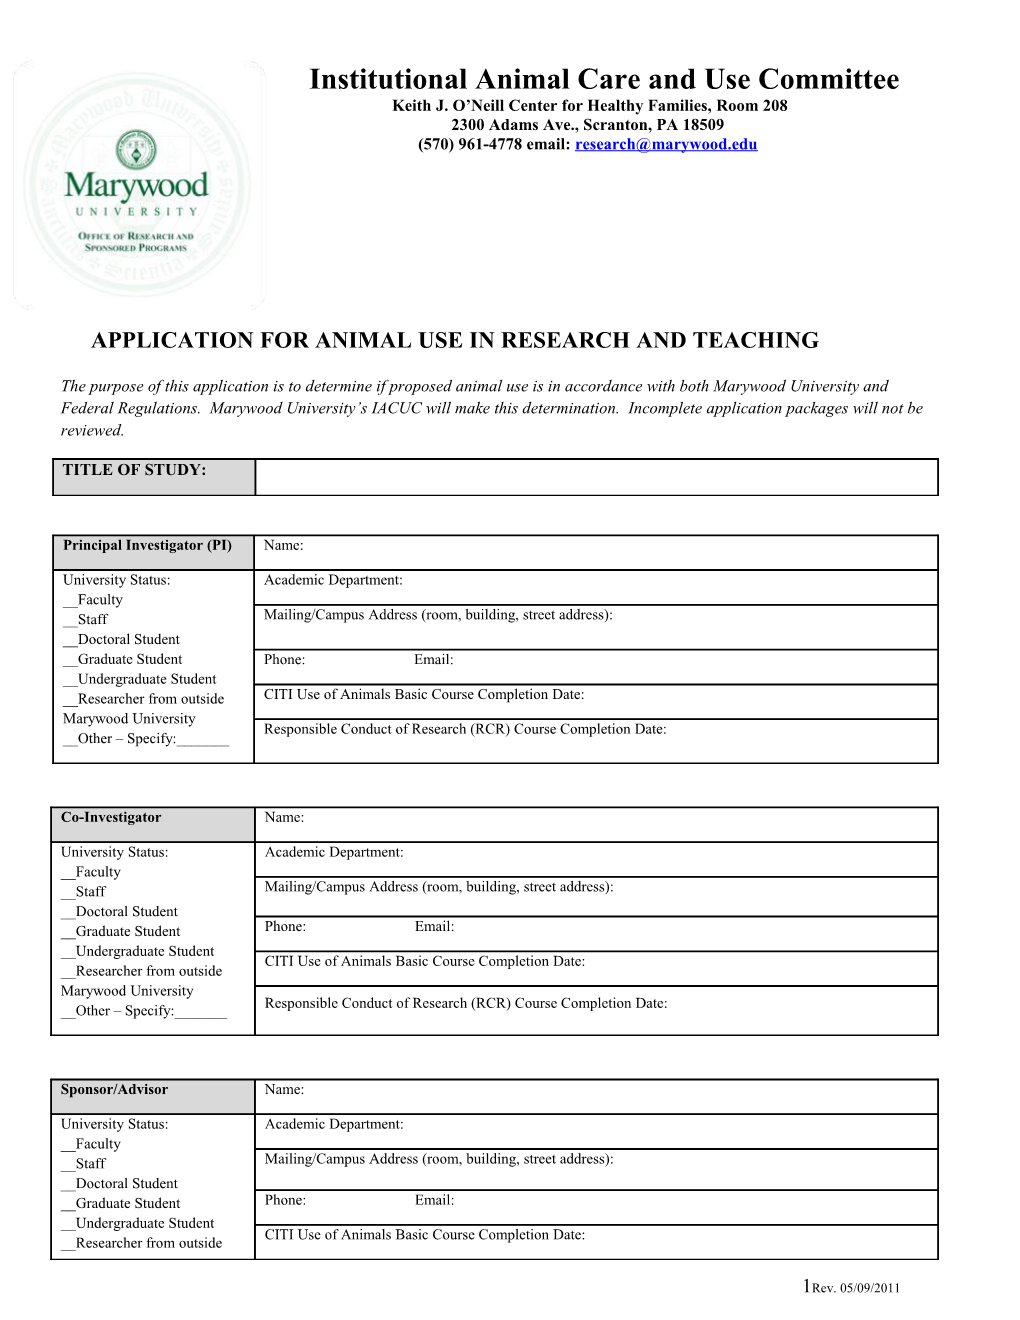 Application to Iacuc for Animal Use in Research and Teaching